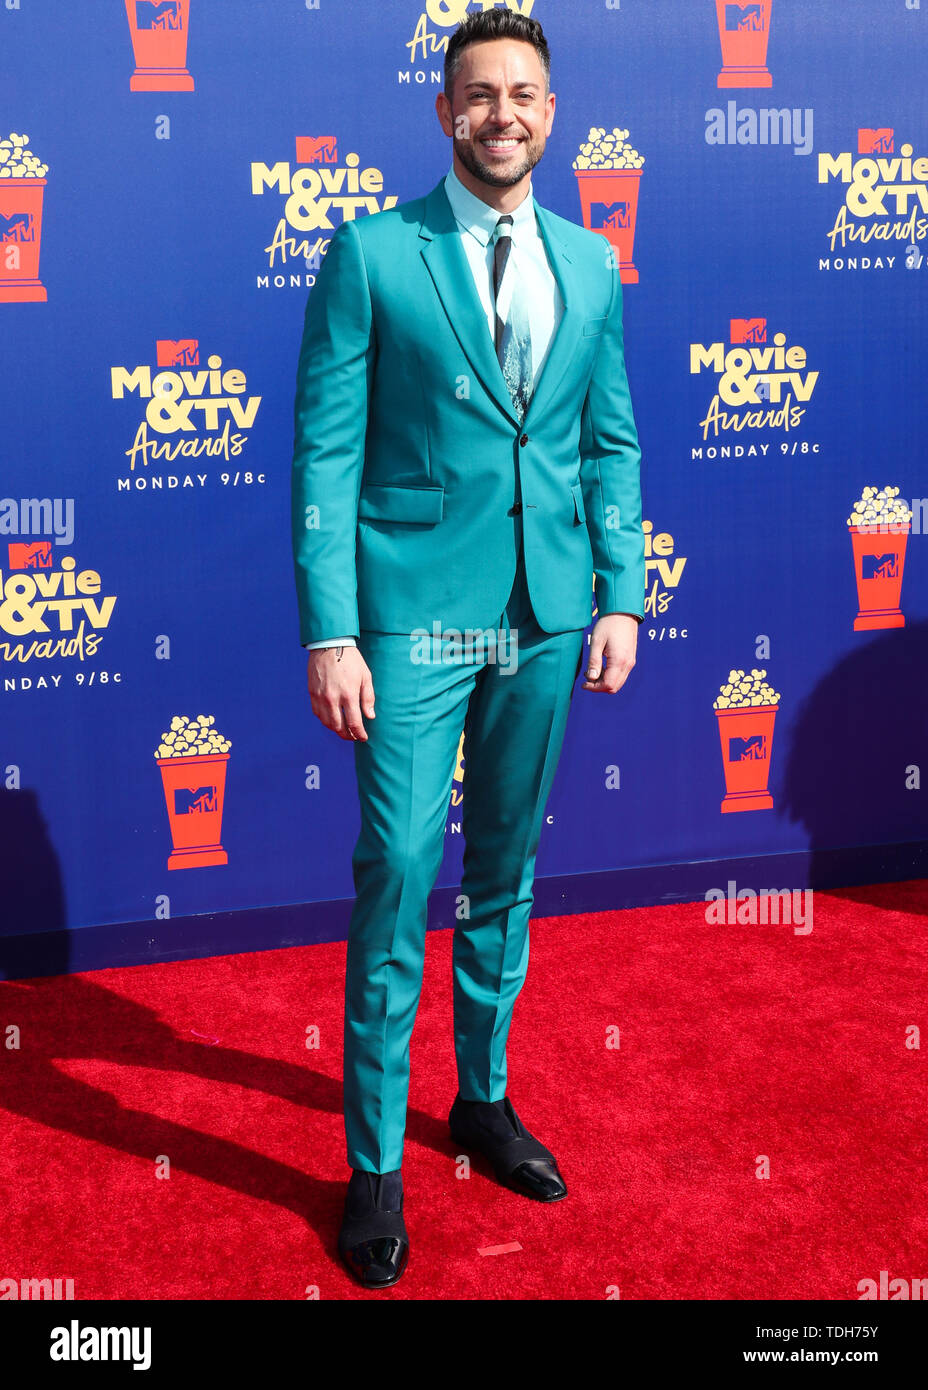 Actor Zachary Levi wearing a Paul Smith suit, Anto shirt, Christian  Louboutin shoes, and a Montblanc watch arrives at the 2019 MTV Movie And TV  Awards held at Barker Hangar on June